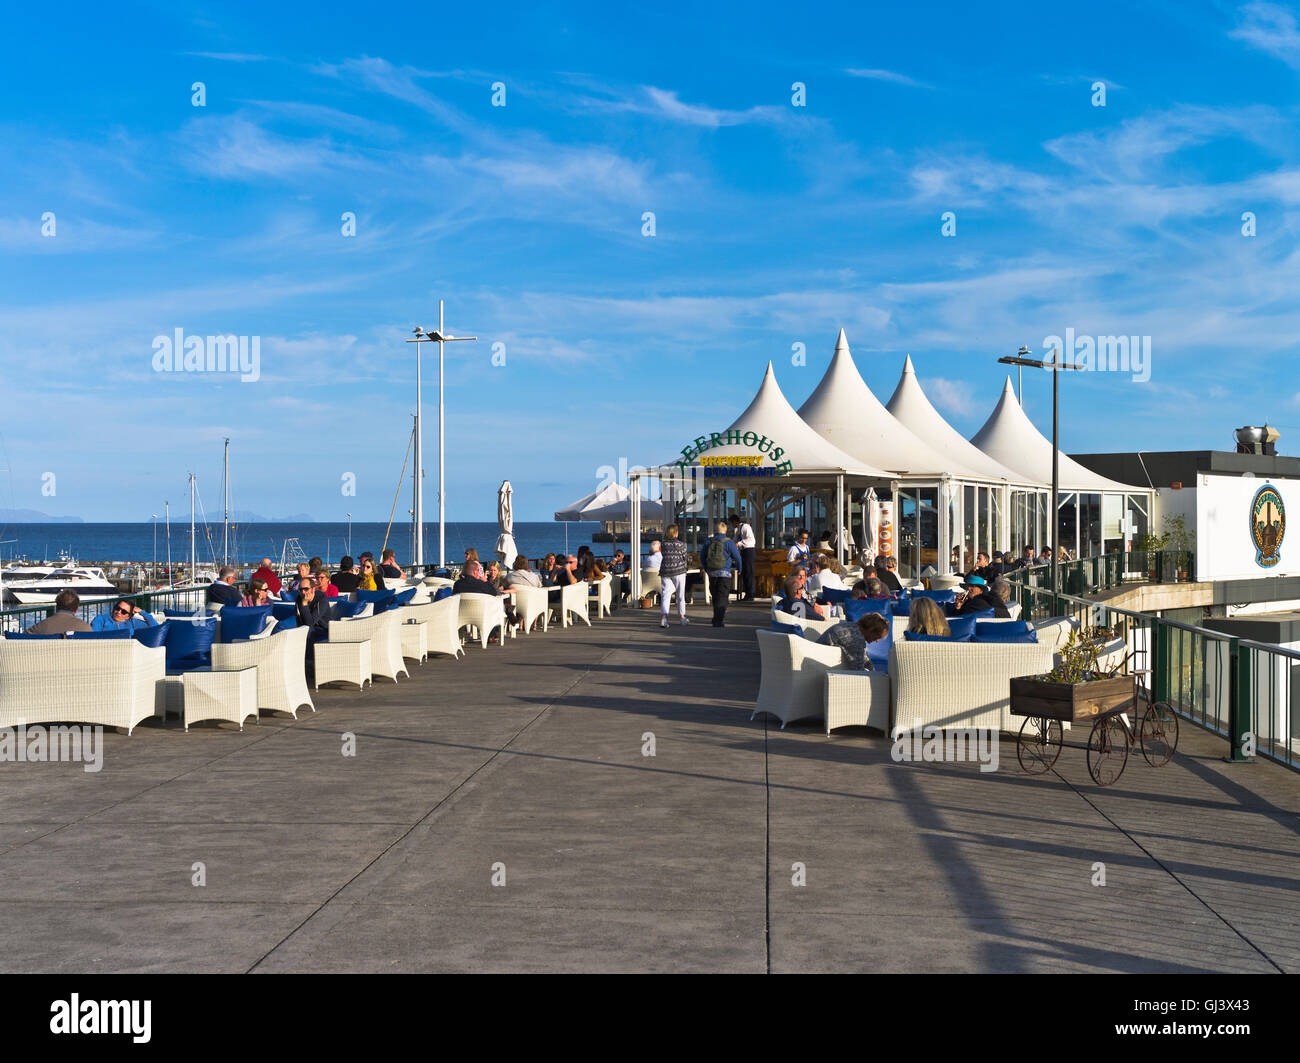 dh Beerhouse Restaurant FUNCHAL MADEIRA People cafe Funchal marina harbour pier Stock Photo